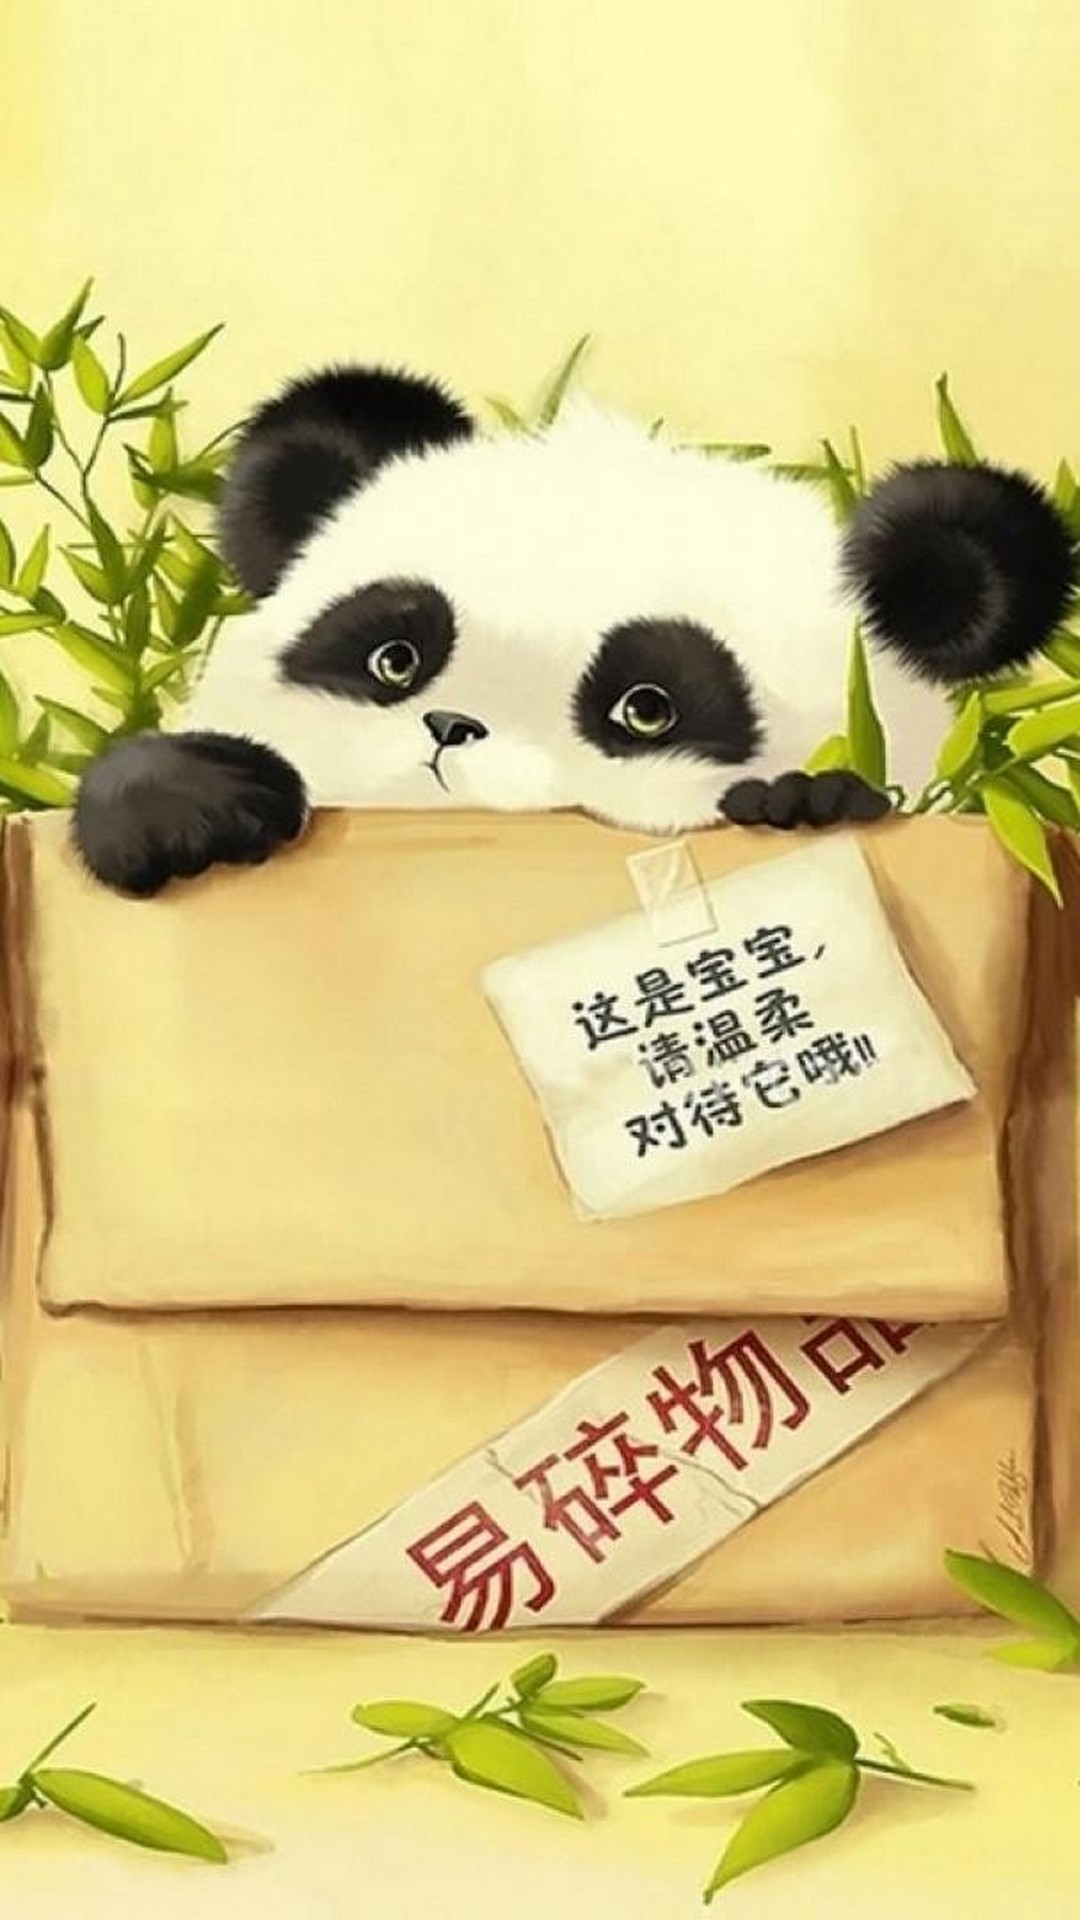 Android Wallpaper Cute Panda With Hd Resolution - Cute Panda Hd Wallpaper  For Android - 1080x1920 Wallpaper 